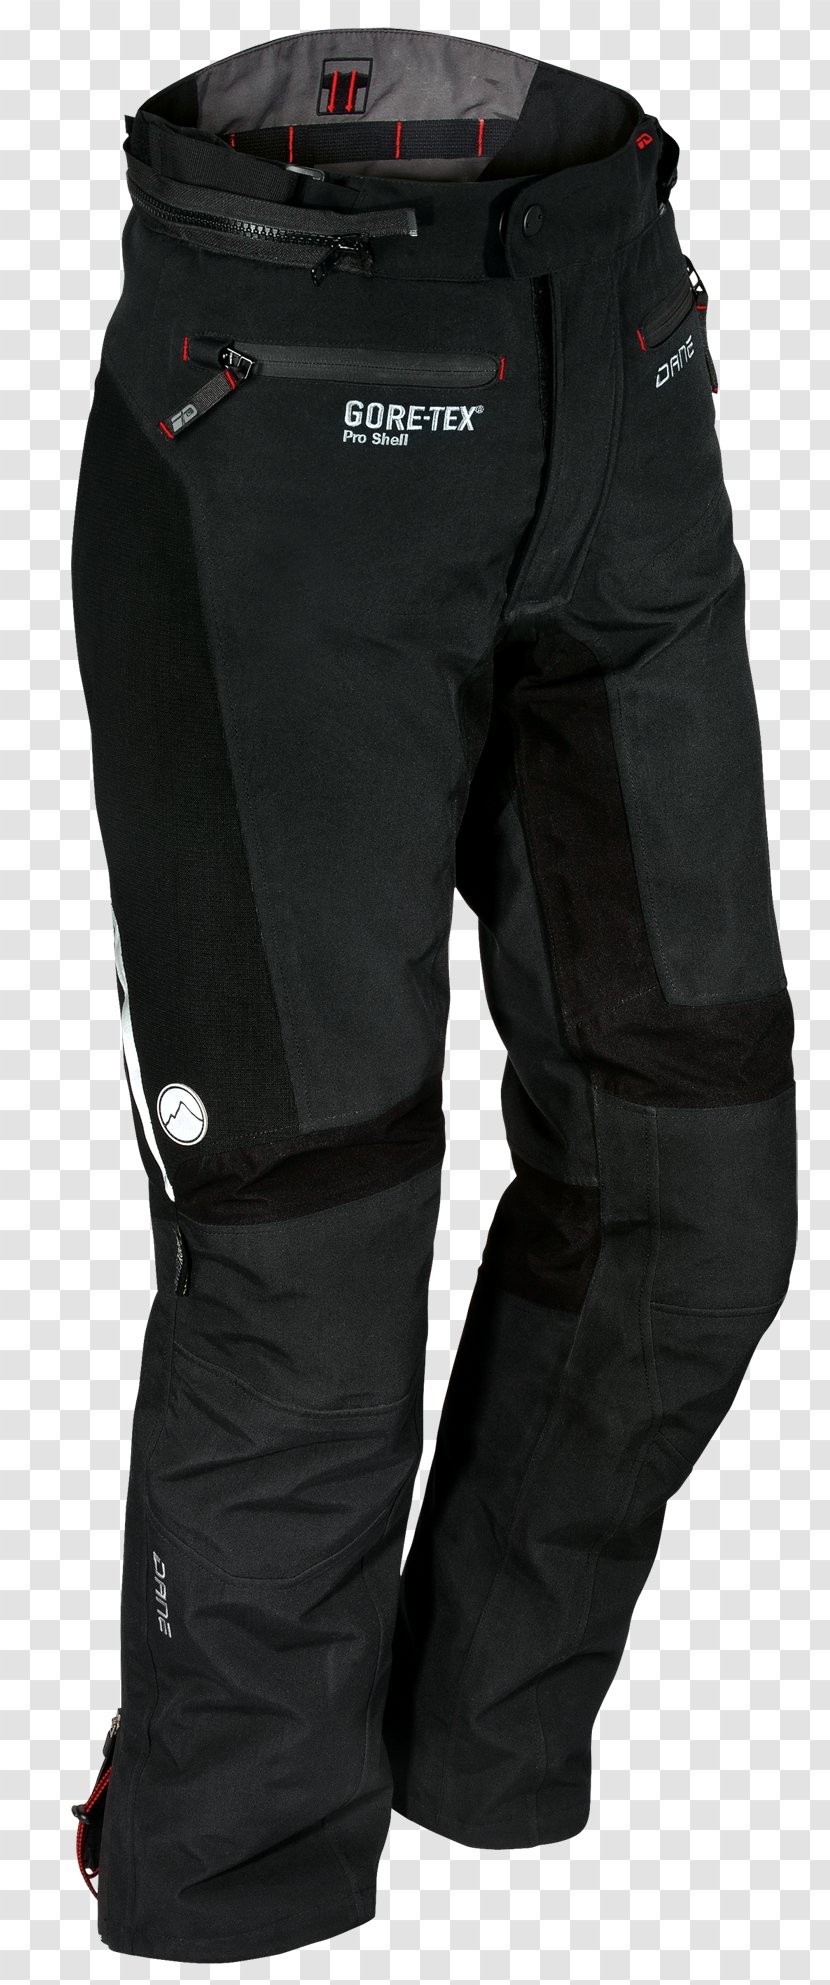 Shell Gore-Tex Pants Motorcycle Personal Protective Equipment Textile Transparent PNG